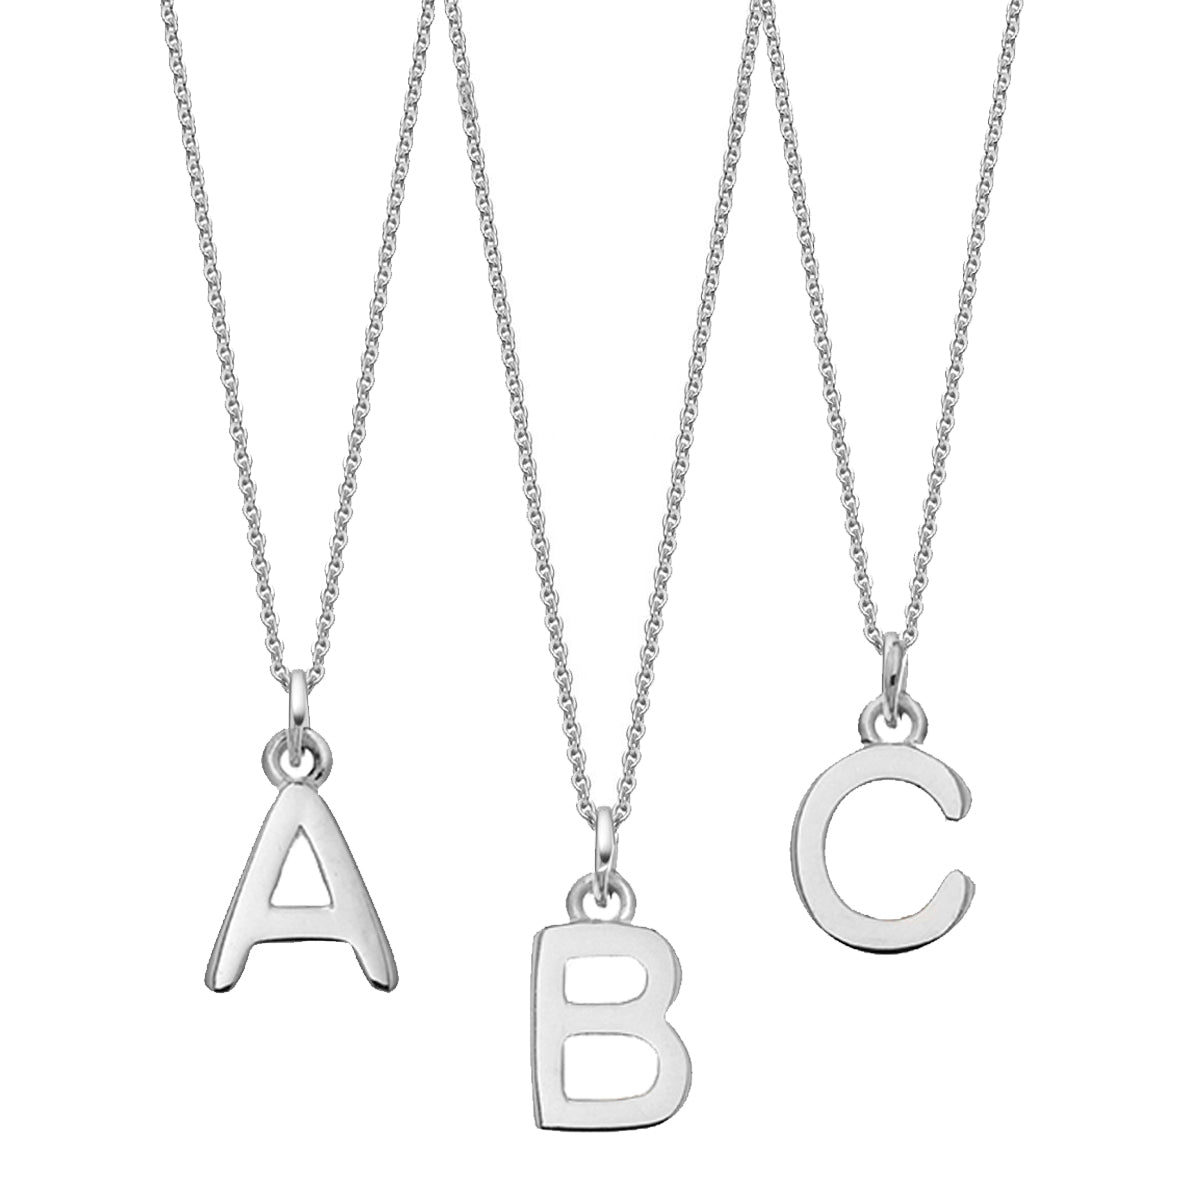 Hey Harper Chunky Letter Necklace - STAINLESS STEEL | Garmentory